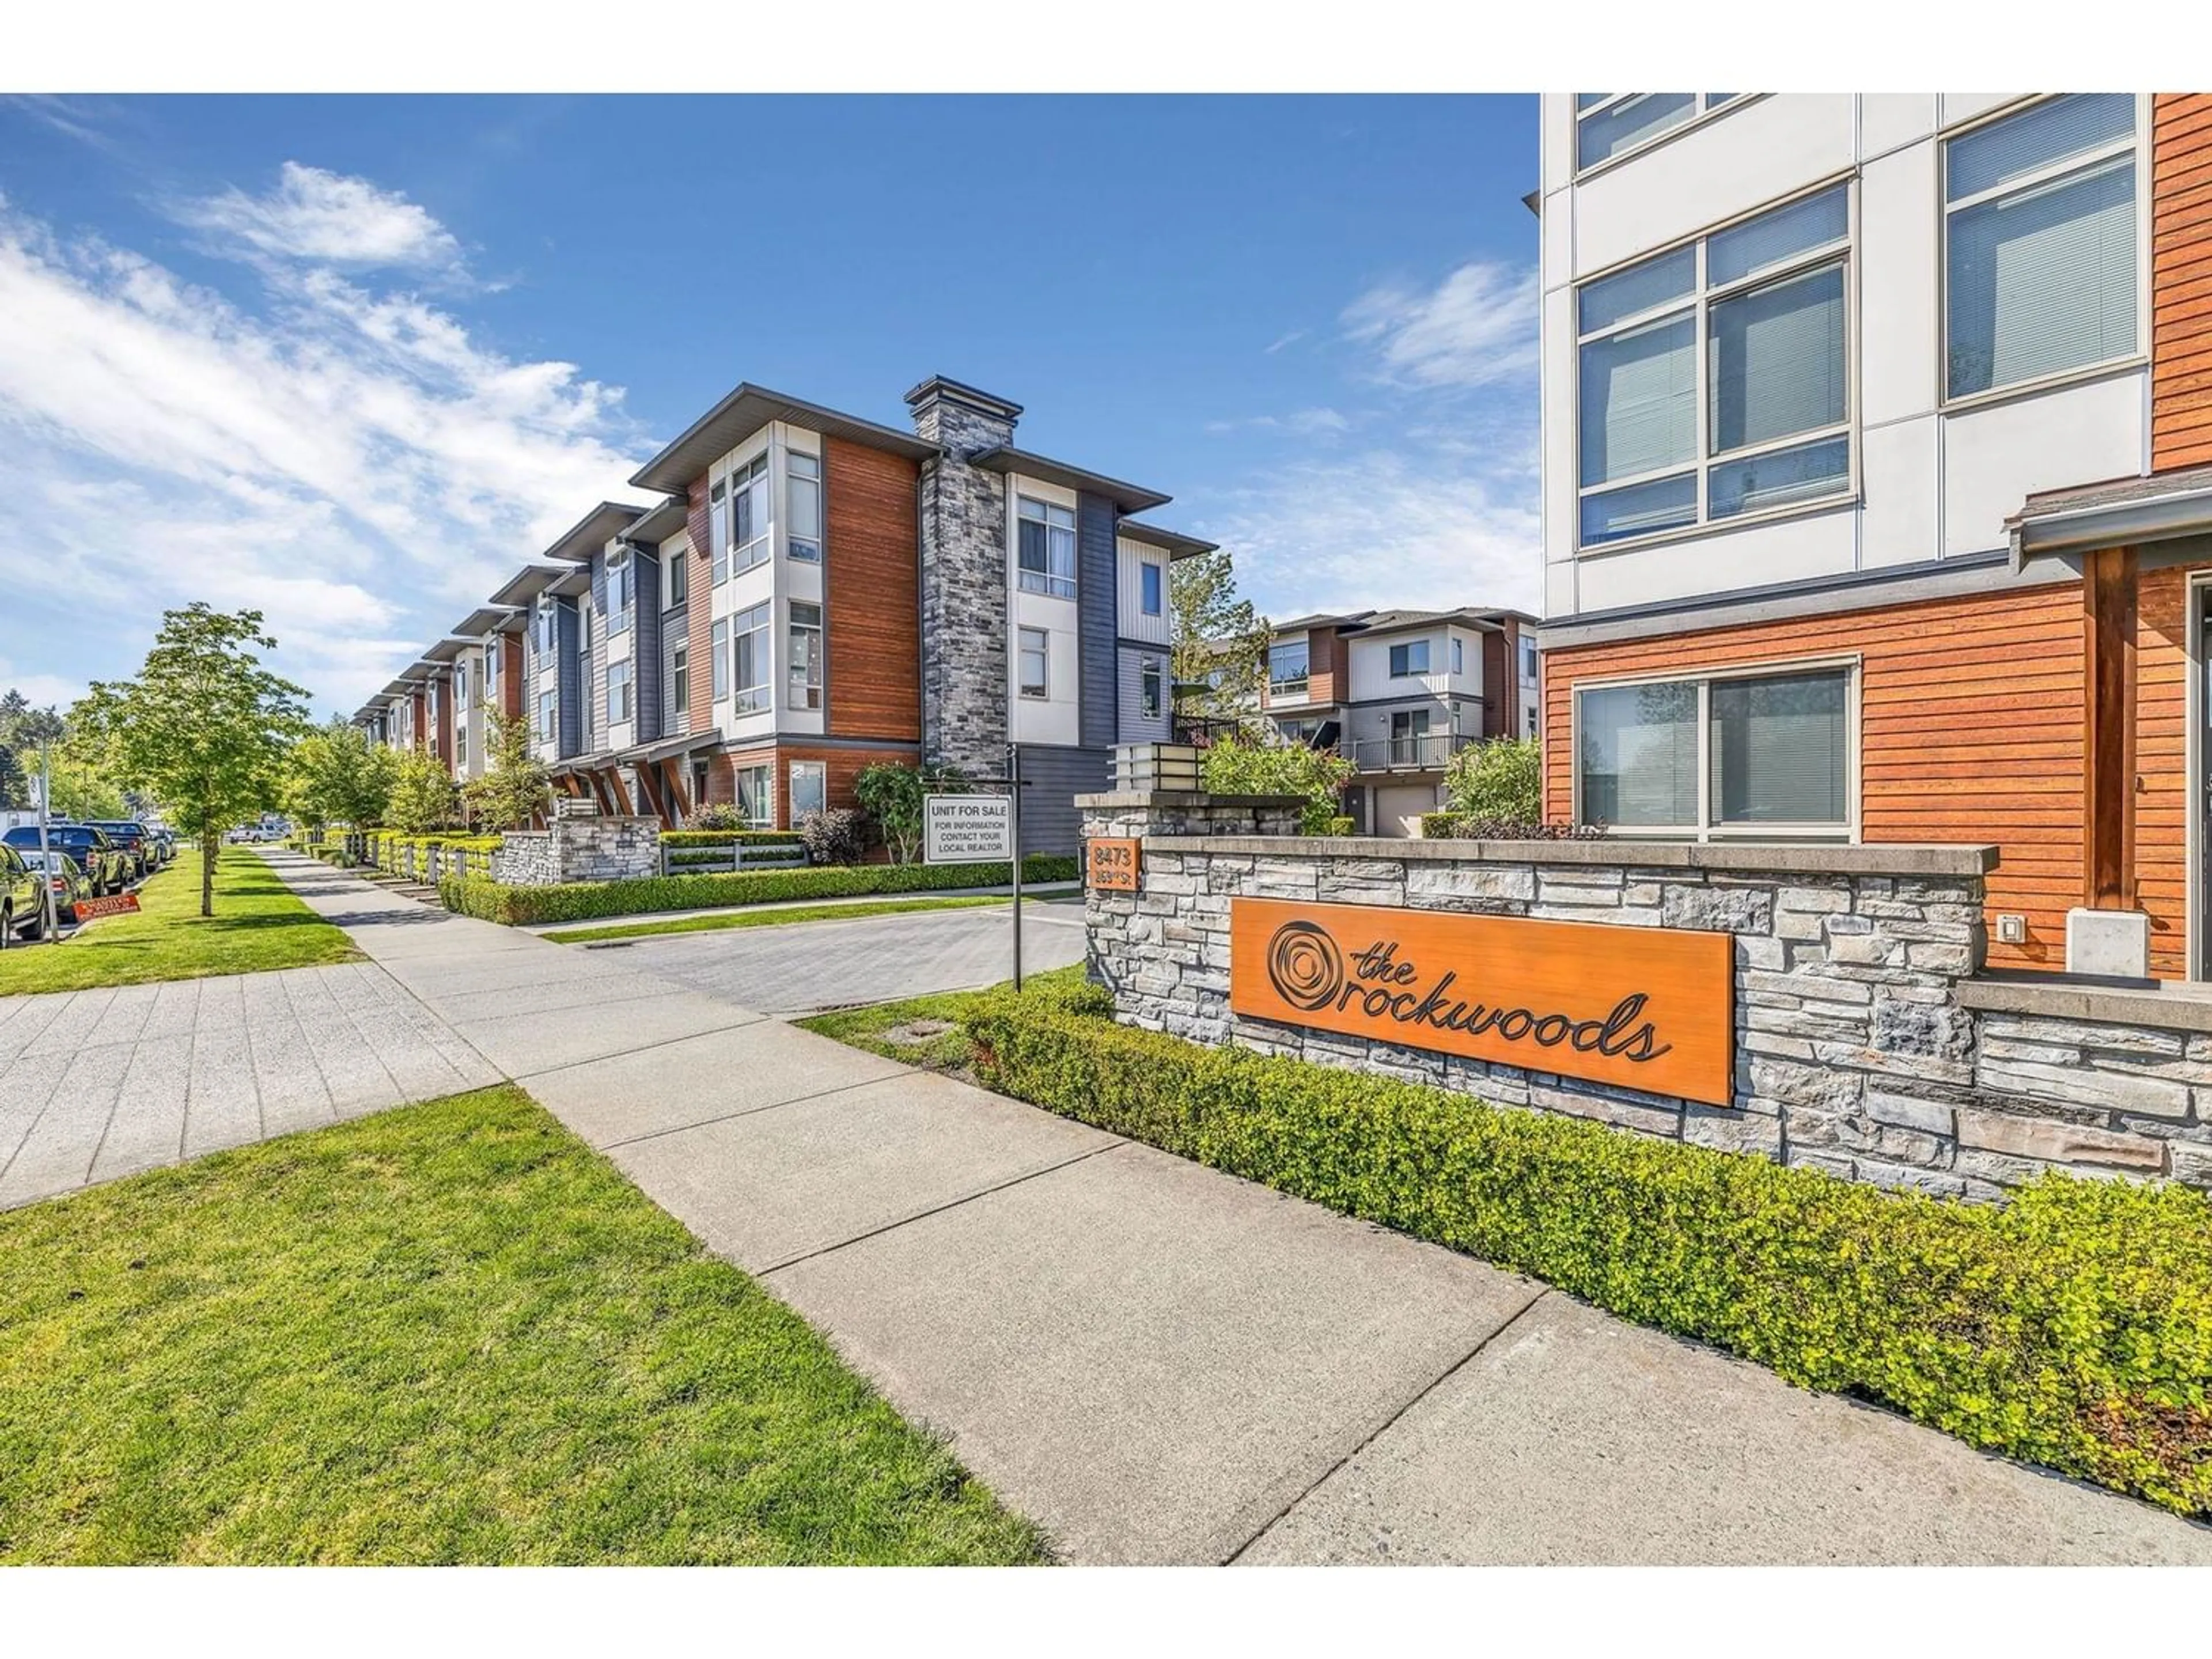 A pic from exterior of the house or condo for 94 8473 163 STREET, Surrey British Columbia V4N6M7